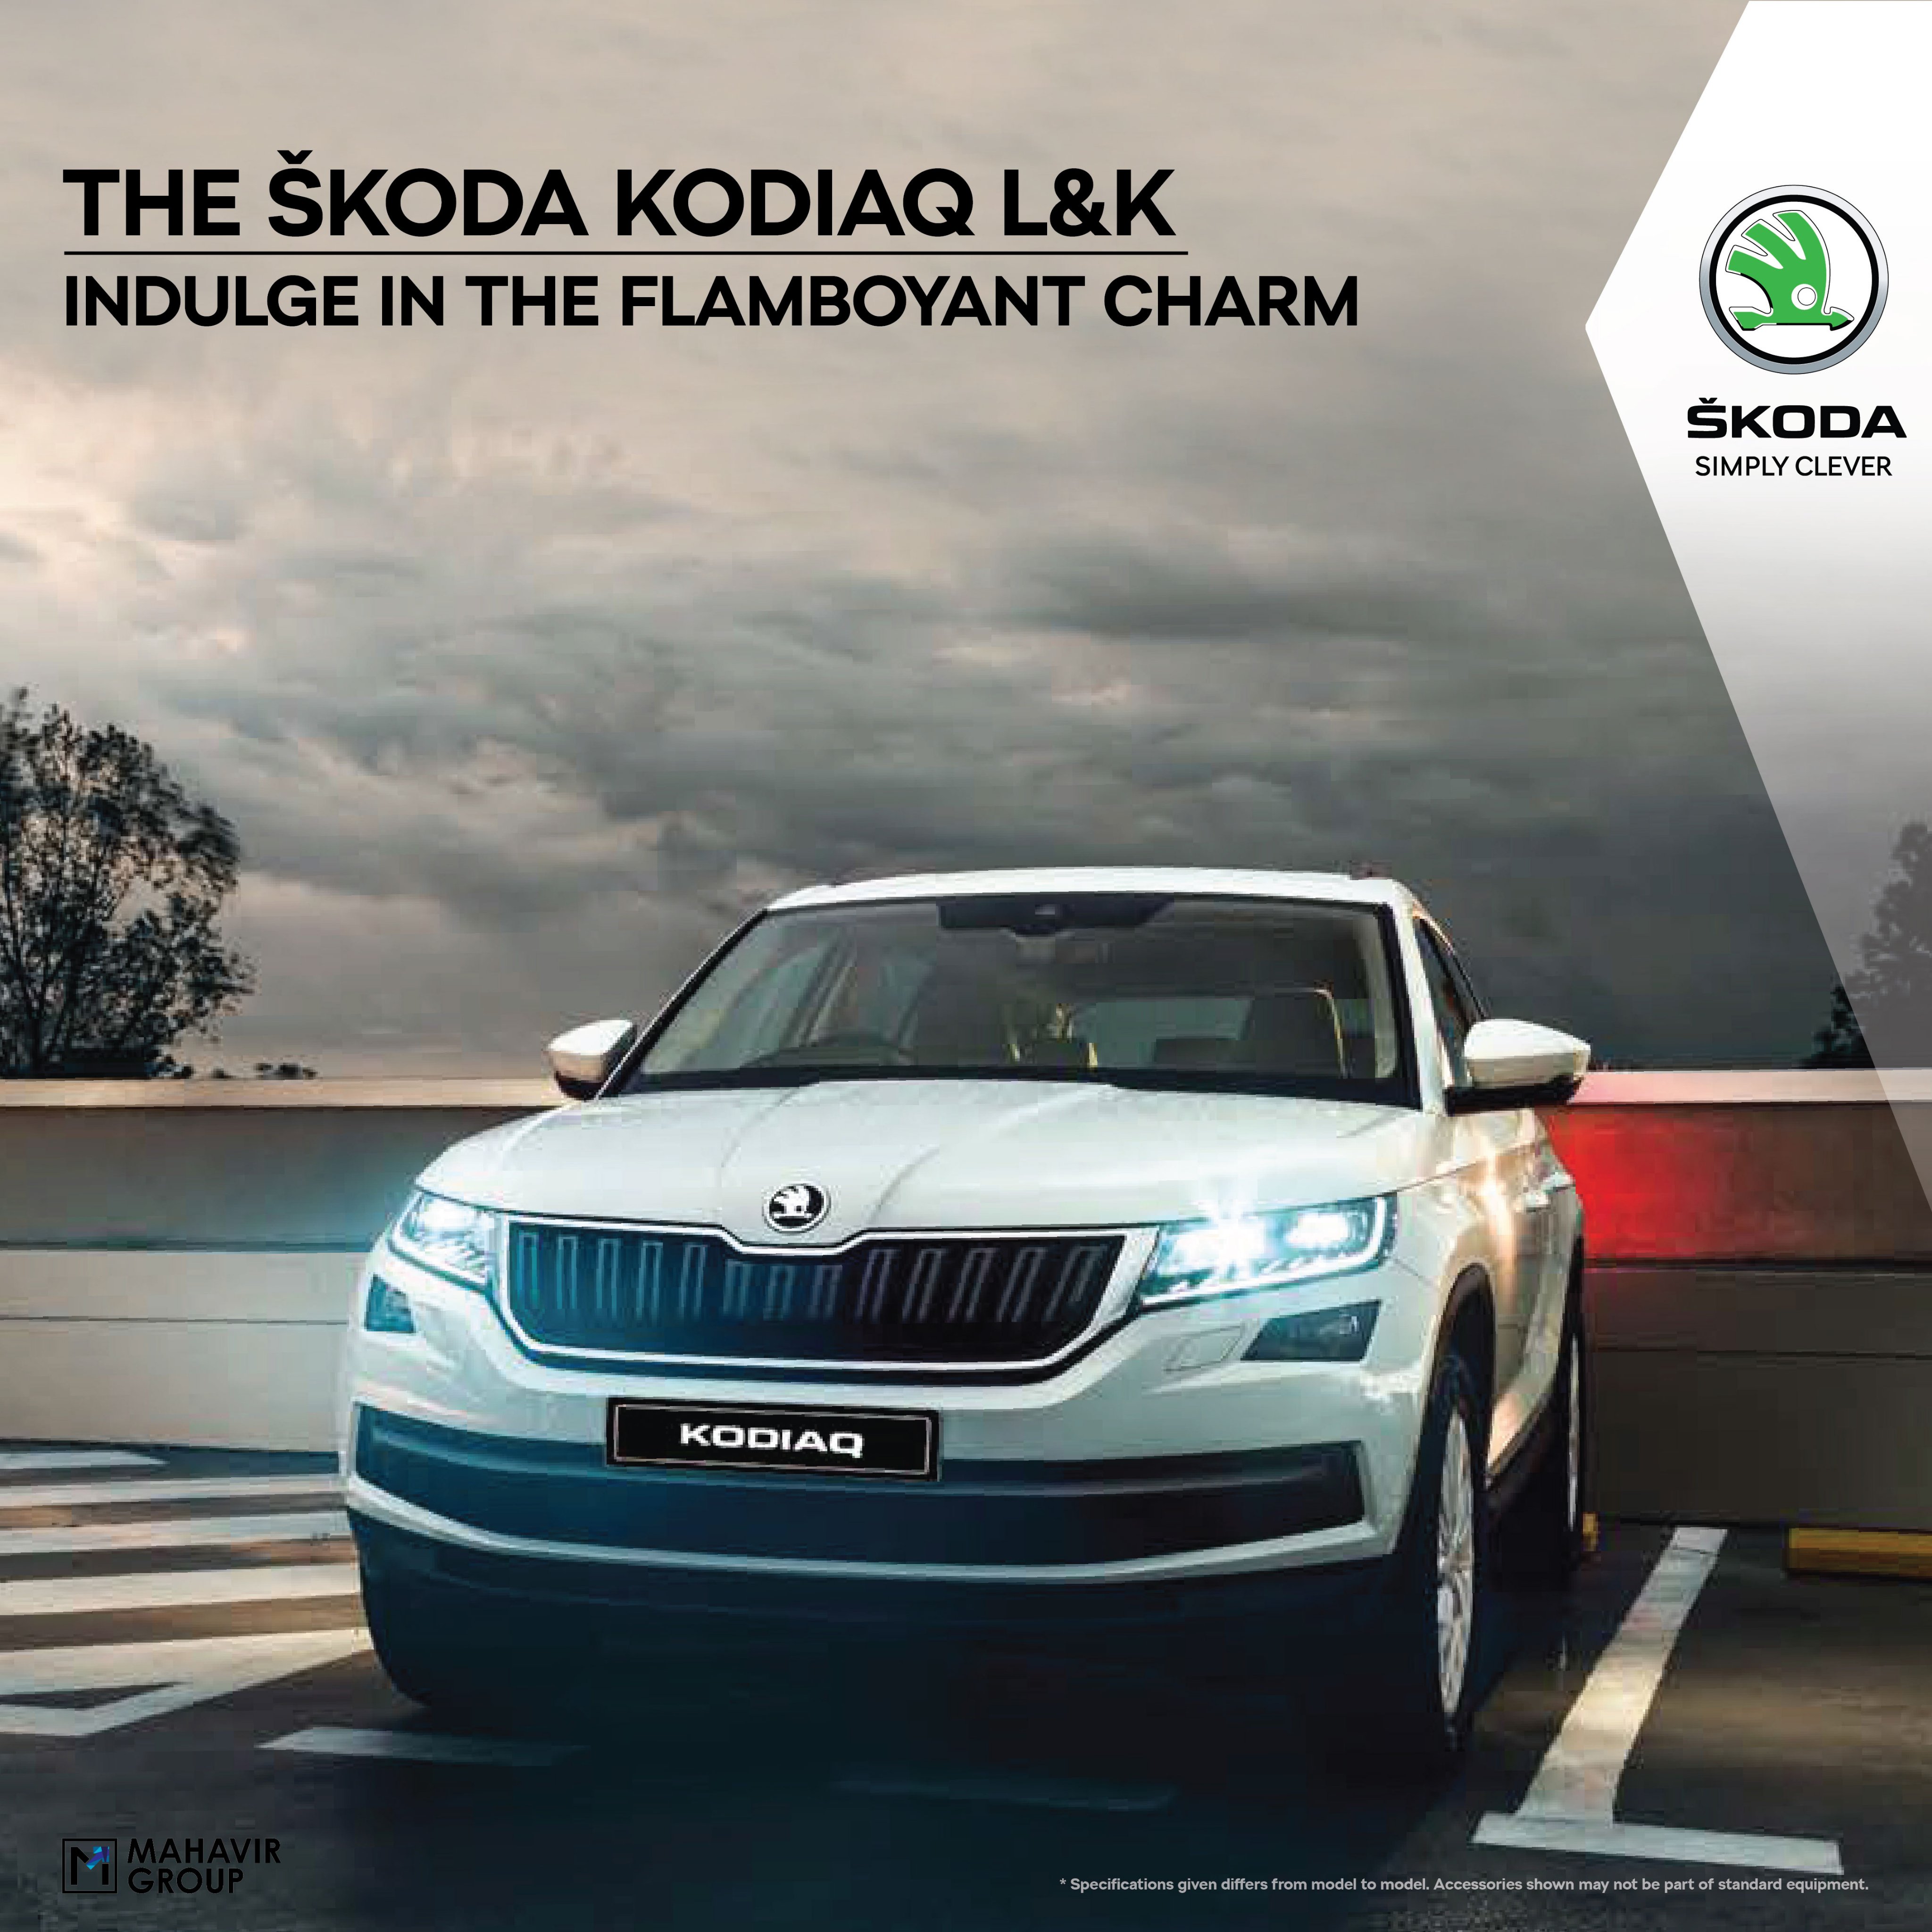 Mahavir Skoda on "Equipped with AFS, the LED headlamps of the Skoda Kodiaq offer high performance with high energy efficiency, thus keeping safety the outmost priority. https://t.co/HSOSfylXeE #SkodaKodiaq #MahavirSkoda